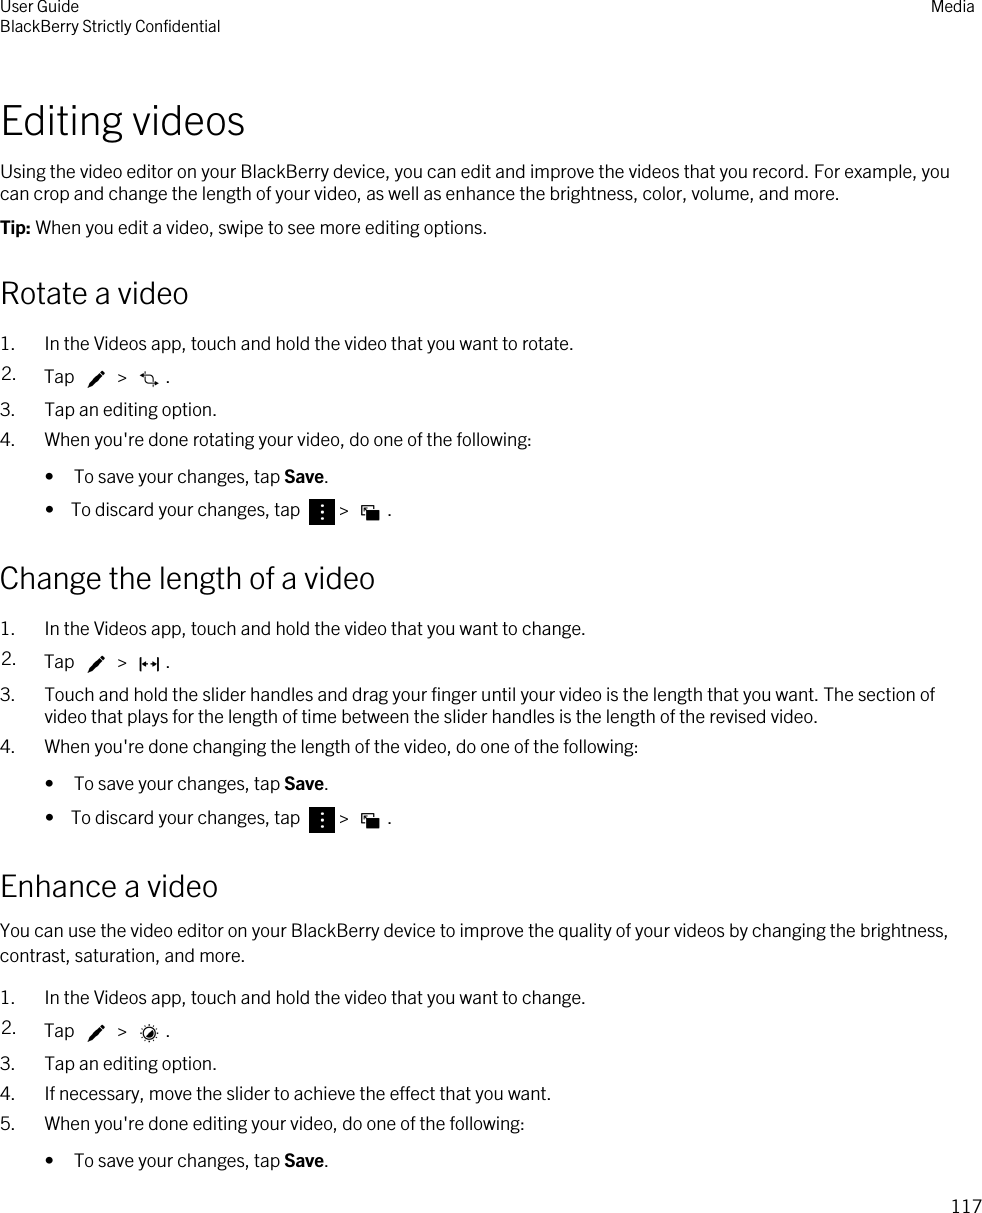 Editing videosUsing the video editor on your BlackBerry device, you can edit and improve the videos that you record. For example, you can crop and change the length of your video, as well as enhance the brightness, color, volume, and more.Tip: When you edit a video, swipe to see more editing options.Rotate a video1. In the Videos app, touch and hold the video that you want to rotate.2. Tap   &gt;  .3. Tap an editing option.4. When you&apos;re done rotating your video, do one of the following:• To save your changes, tap Save.•  To discard your changes, tap  &gt;  .Change the length of a video1. In the Videos app, touch and hold the video that you want to change.2. Tap   &gt;  .3. Touch and hold the slider handles and drag your finger until your video is the length that you want. The section of video that plays for the length of time between the slider handles is the length of the revised video.4. When you&apos;re done changing the length of the video, do one of the following:• To save your changes, tap Save.•  To discard your changes, tap  &gt;  .Enhance a videoYou can use the video editor on your BlackBerry device to improve the quality of your videos by changing the brightness, contrast, saturation, and more.1. In the Videos app, touch and hold the video that you want to change.2. Tap   &gt;  .3. Tap an editing option.4. If necessary, move the slider to achieve the effect that you want.5. When you&apos;re done editing your video, do one of the following:• To save your changes, tap Save.User GuideBlackBerry Strictly Confidential Media117